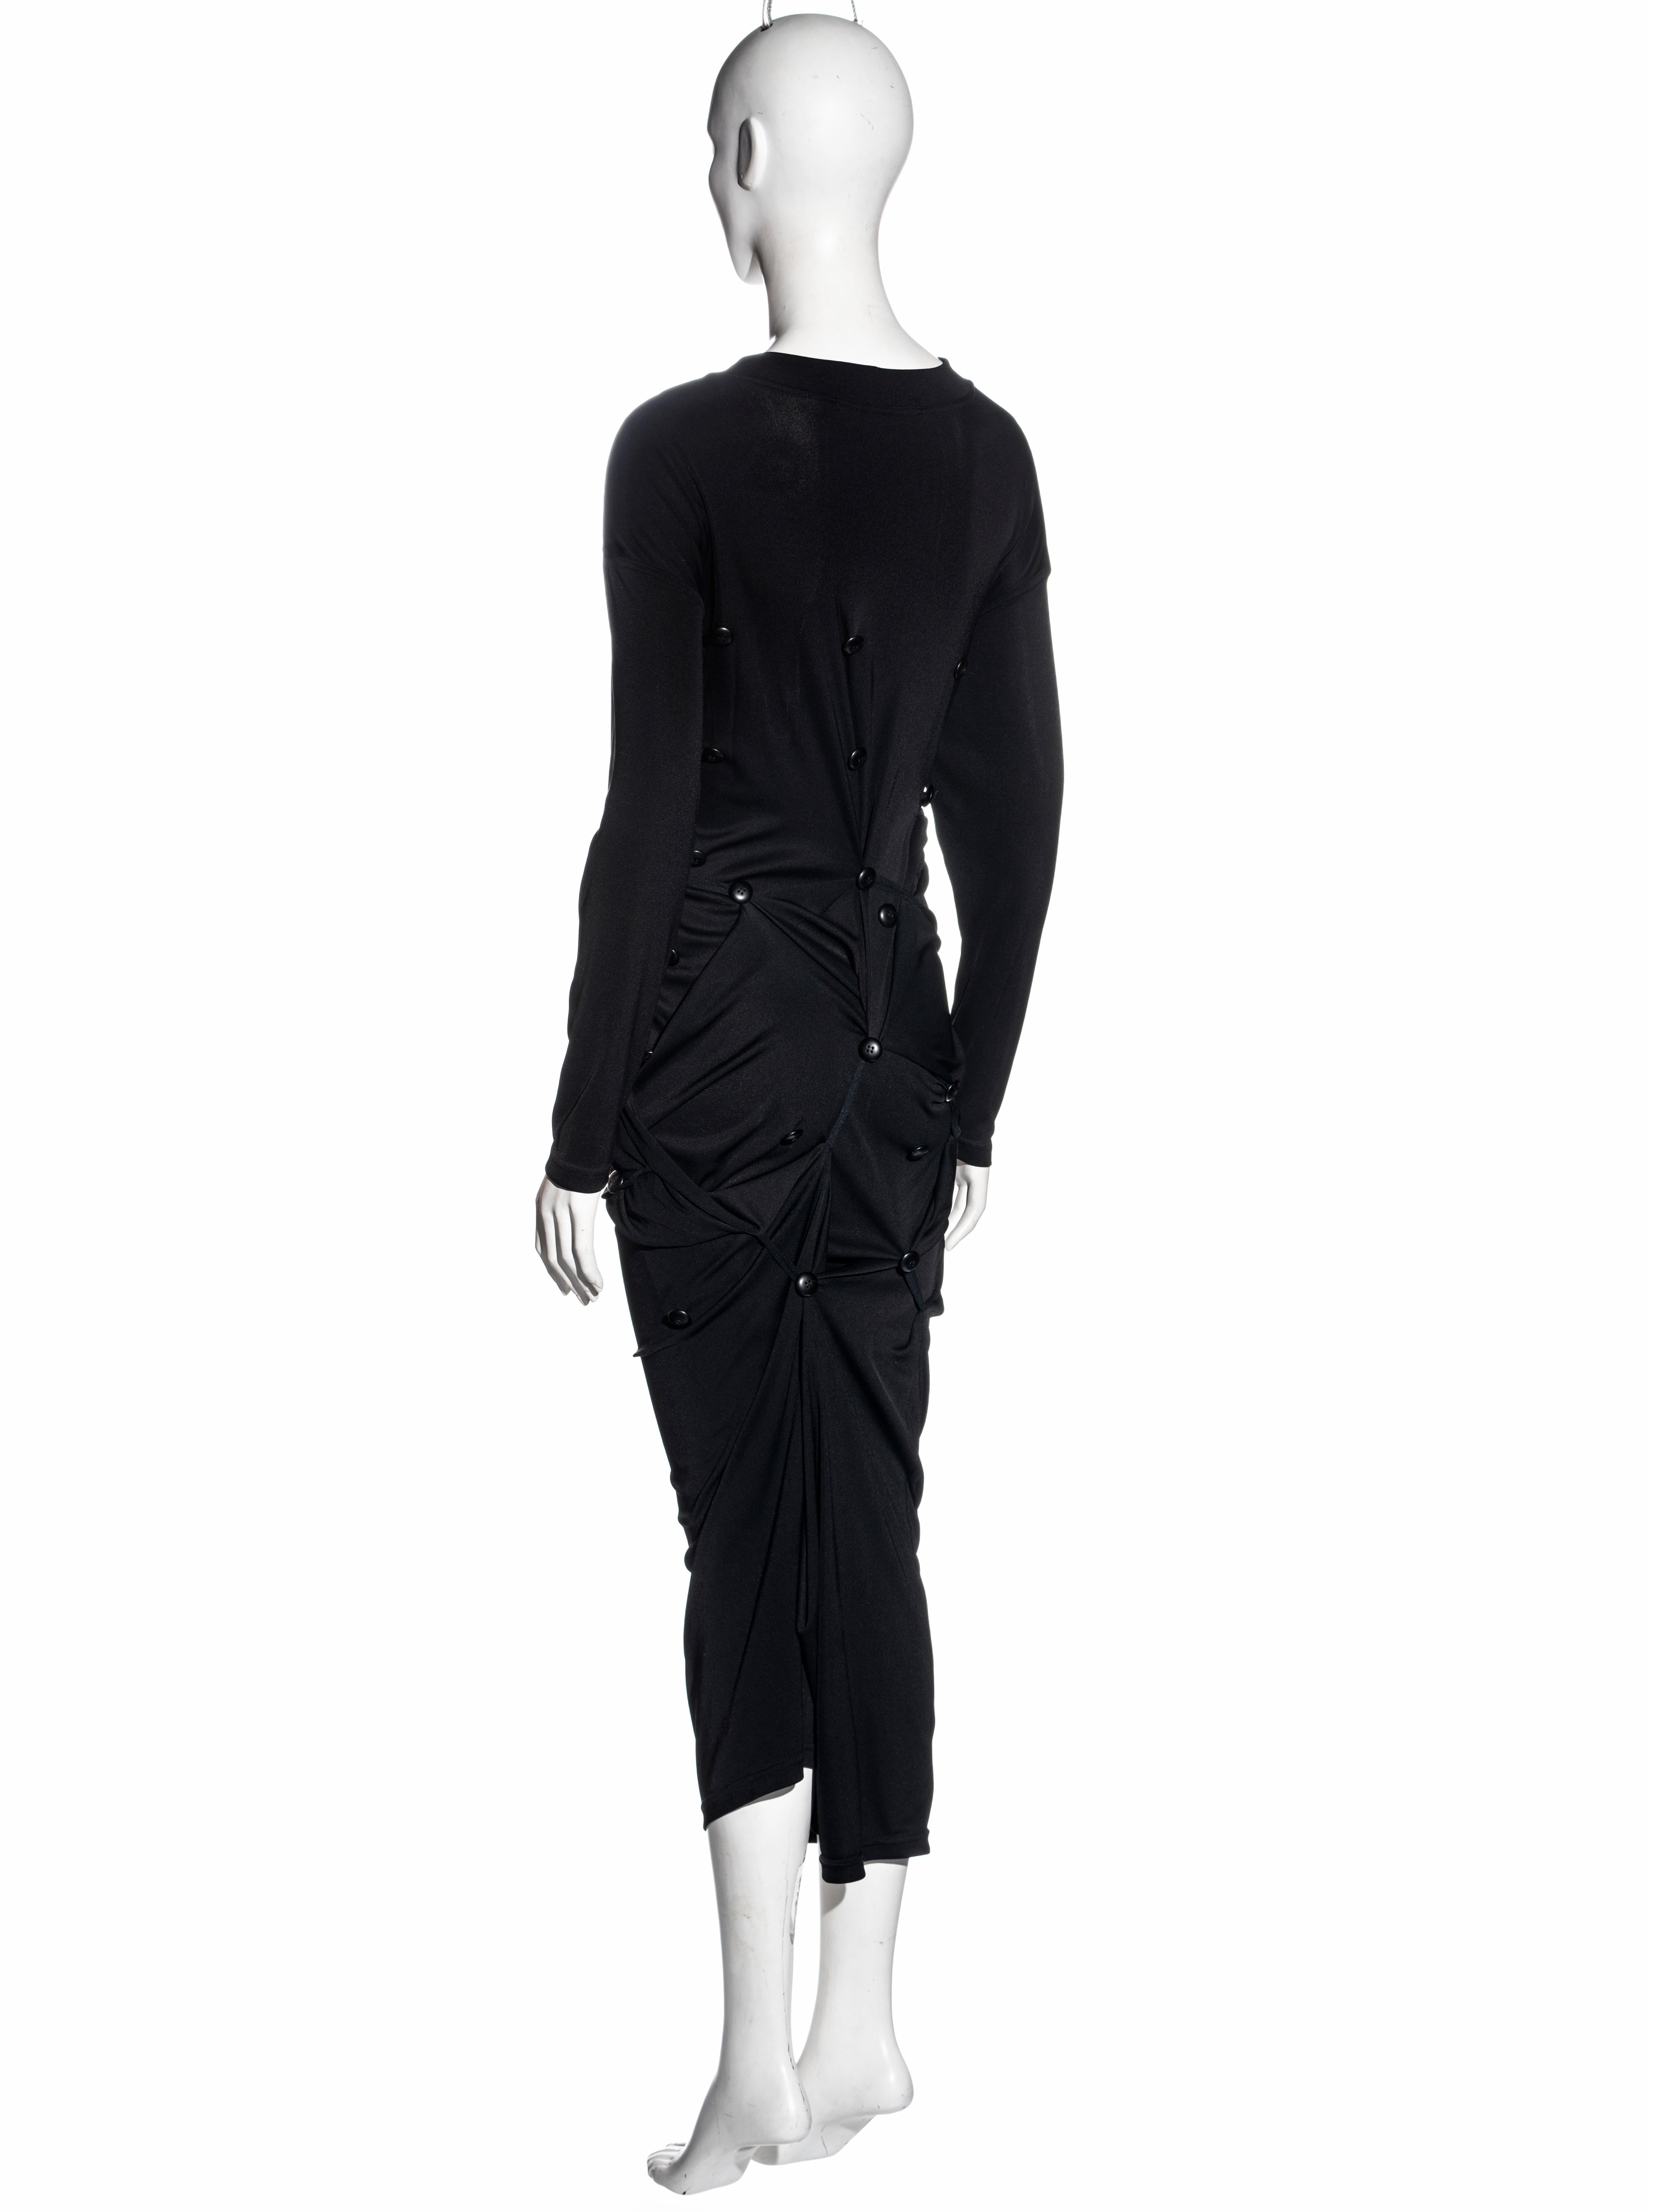 Dolce & Gabbana black jersey maxi dress with adjustable button closures, fw 1987 For Sale 2